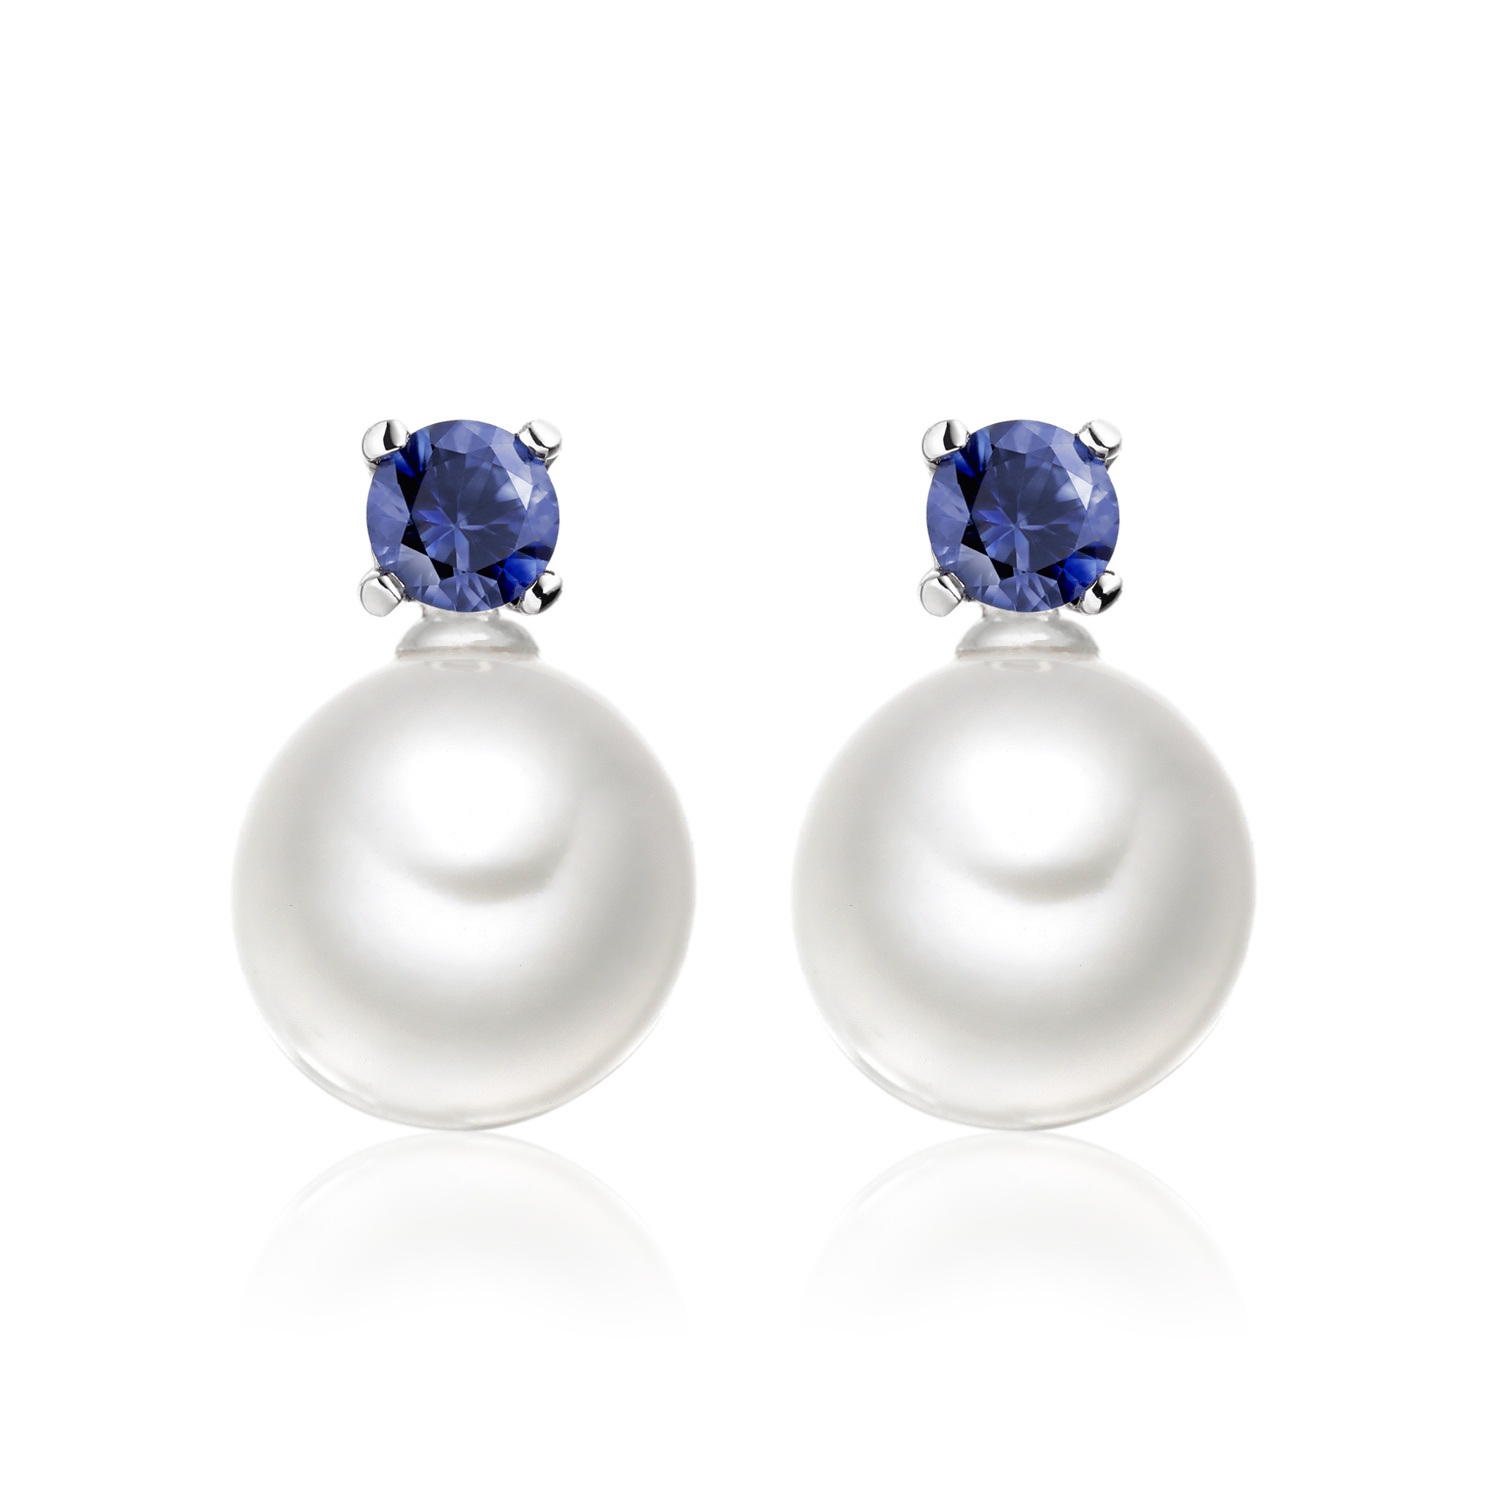 Blue Sapphire Studs in White Gold with Akoya Pearls | Winterson